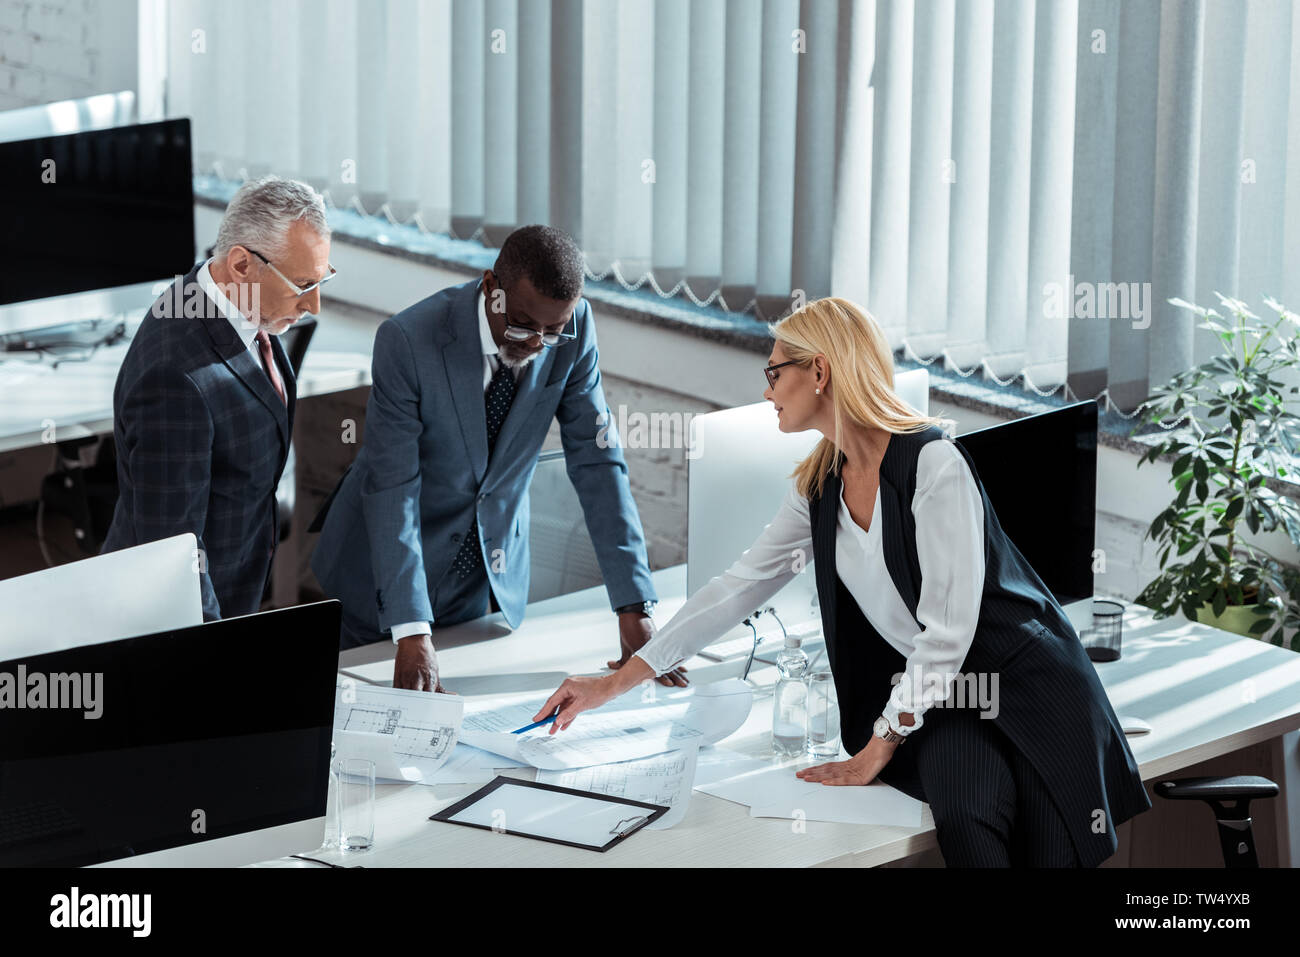 overhead view of blonde businesswoman in glasses holding pen near blueprints and multicultural businessmen Stock Photo